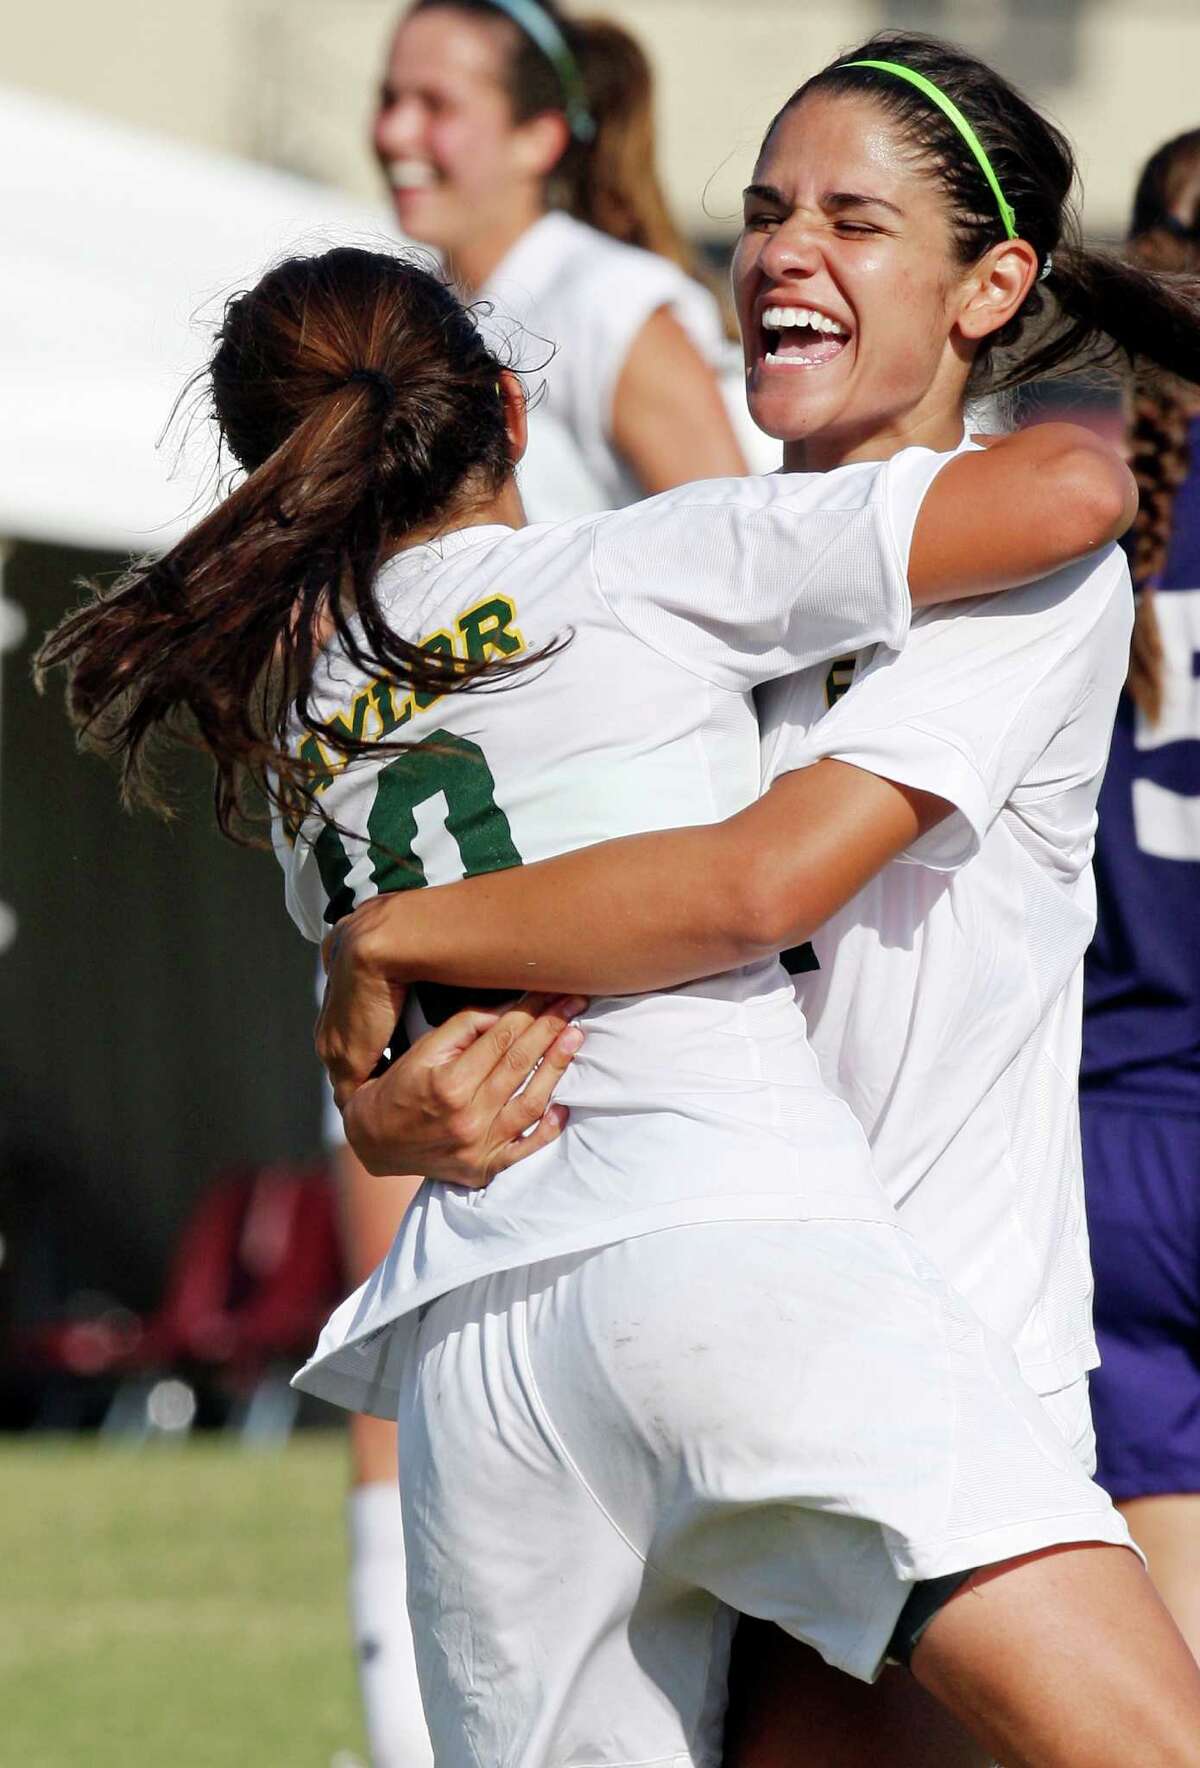 Baylor's Bri Campos (left) celebrates with Larissa Campos after Larissa scored a goal during second half action againt TCU Sunday Nov. 4, 2012 during the 2012 Big 12 Soccer Championship match. Baylor won 4-1.